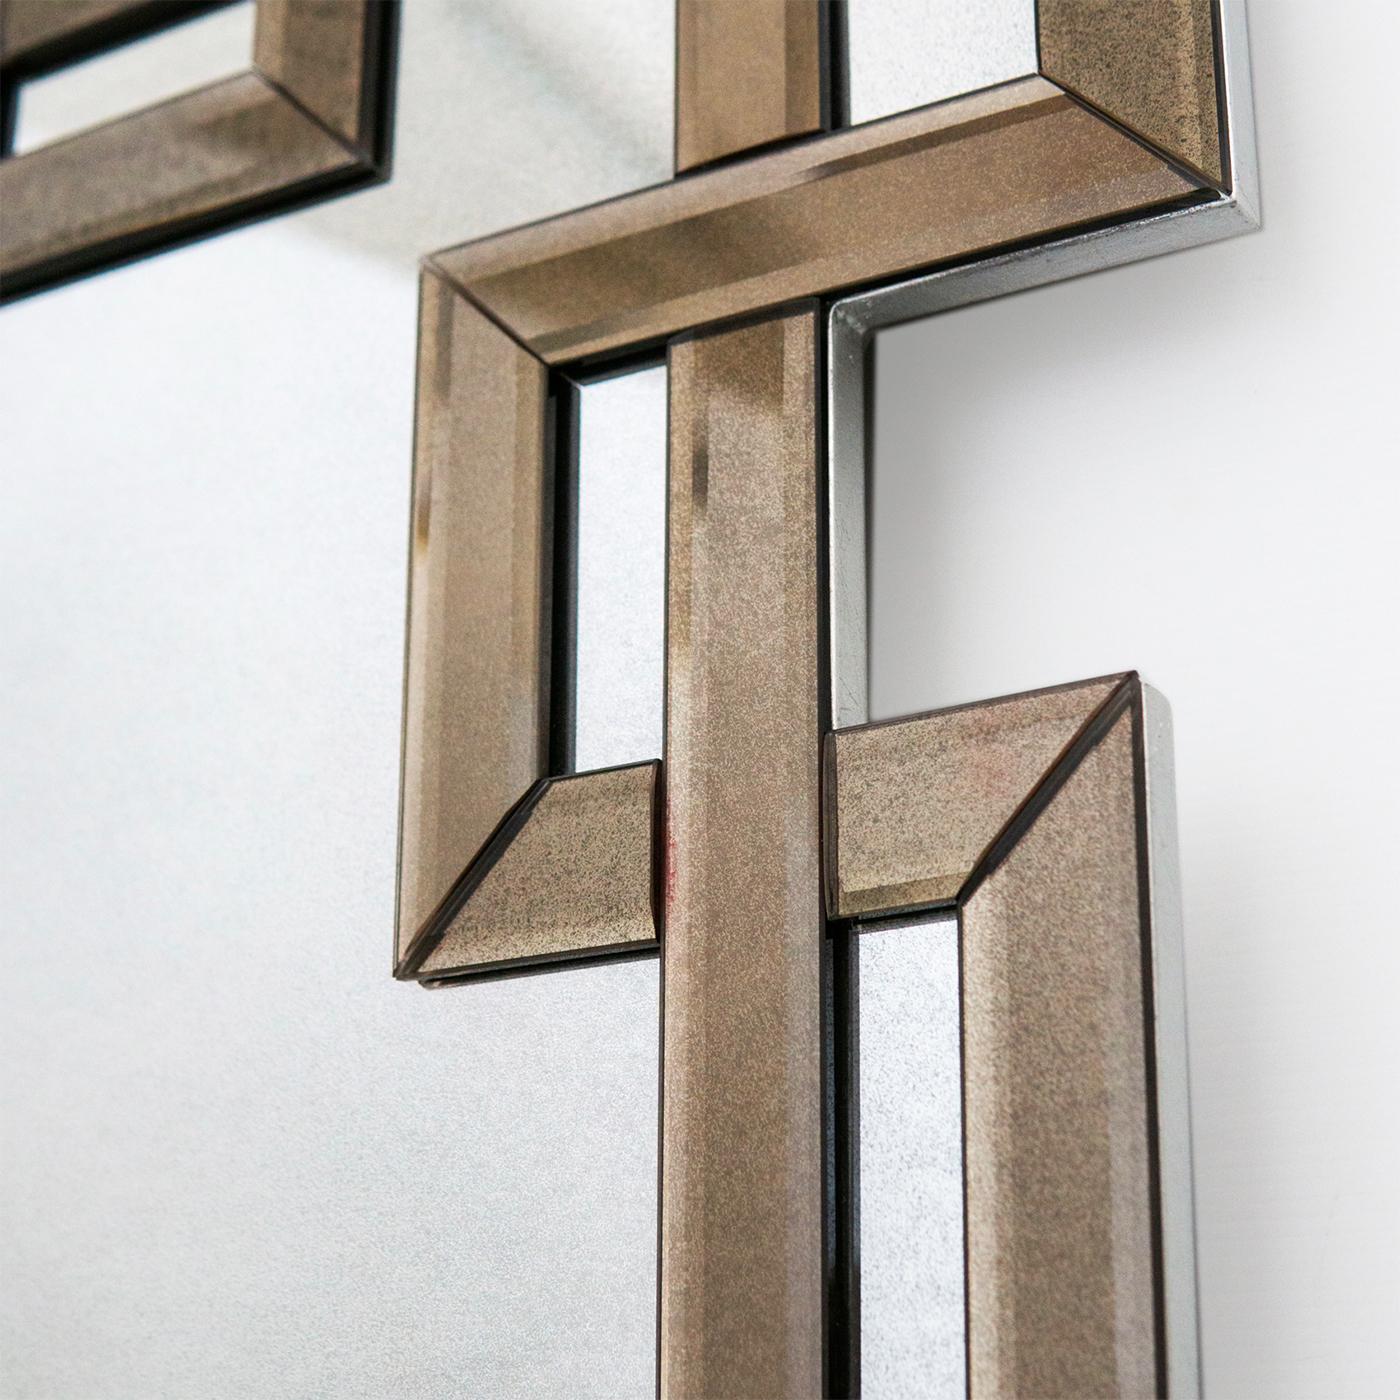 Art Decò Style Greca Mirror is part of the Notre Dame Collection. Structure made of wood with silver leafed edges. Central part is made of glass with a medium antique mirrored finish. Frame made of beveled bronze glass with medium antique mirrored